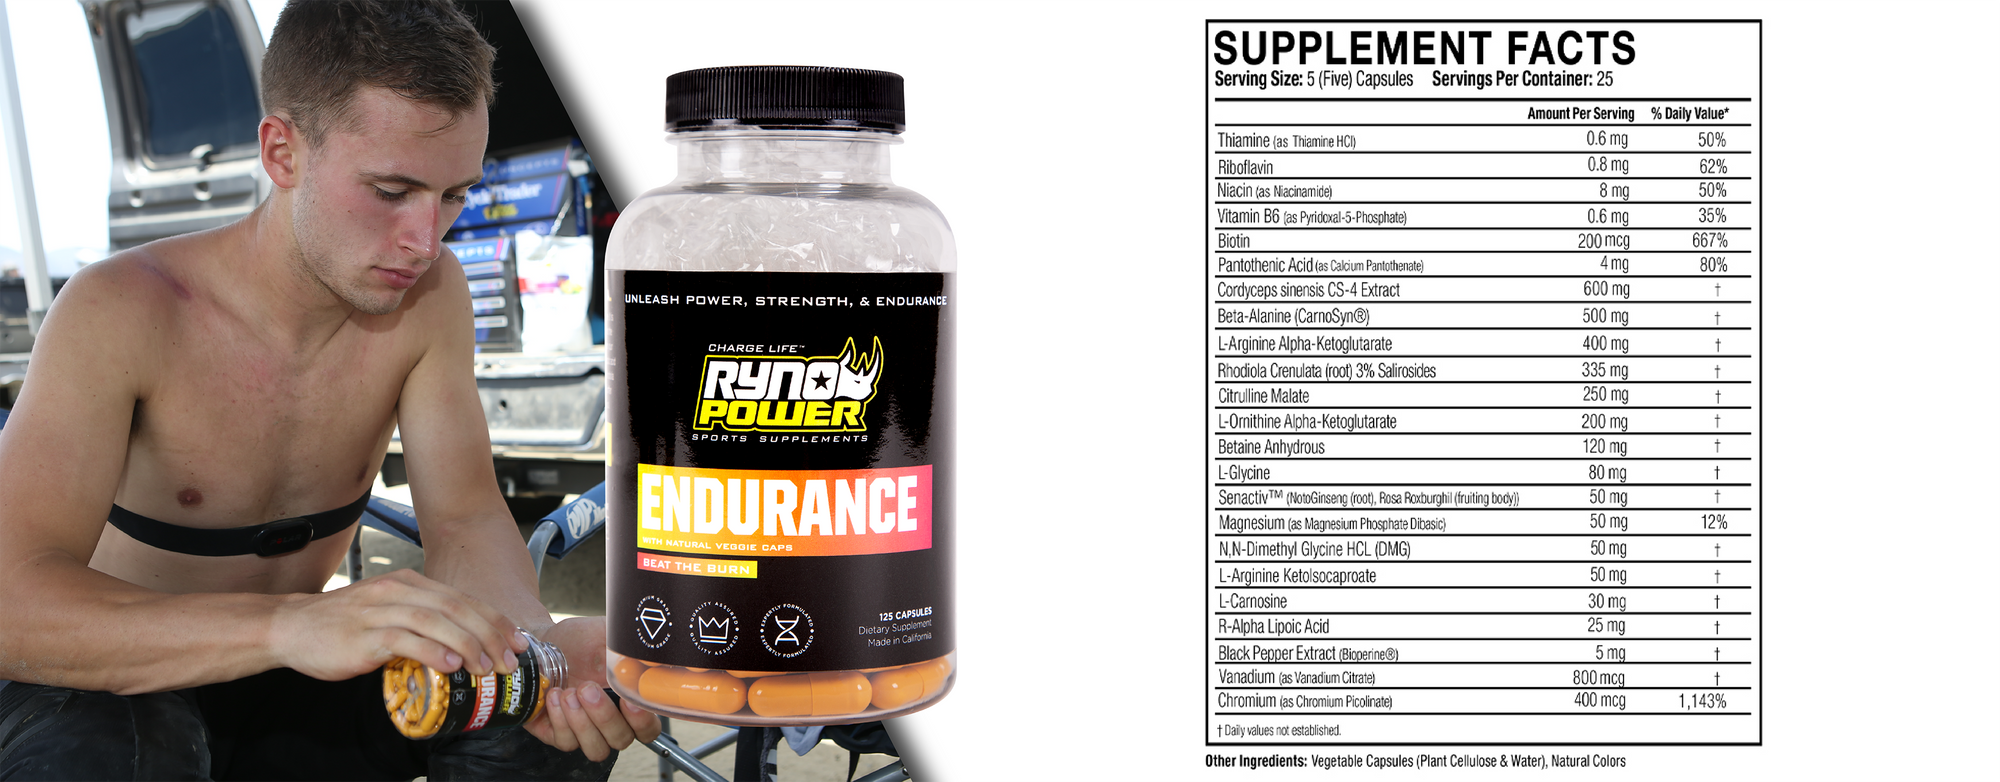 Endurance Supplement Facts w/ person pouring capsules from bottle